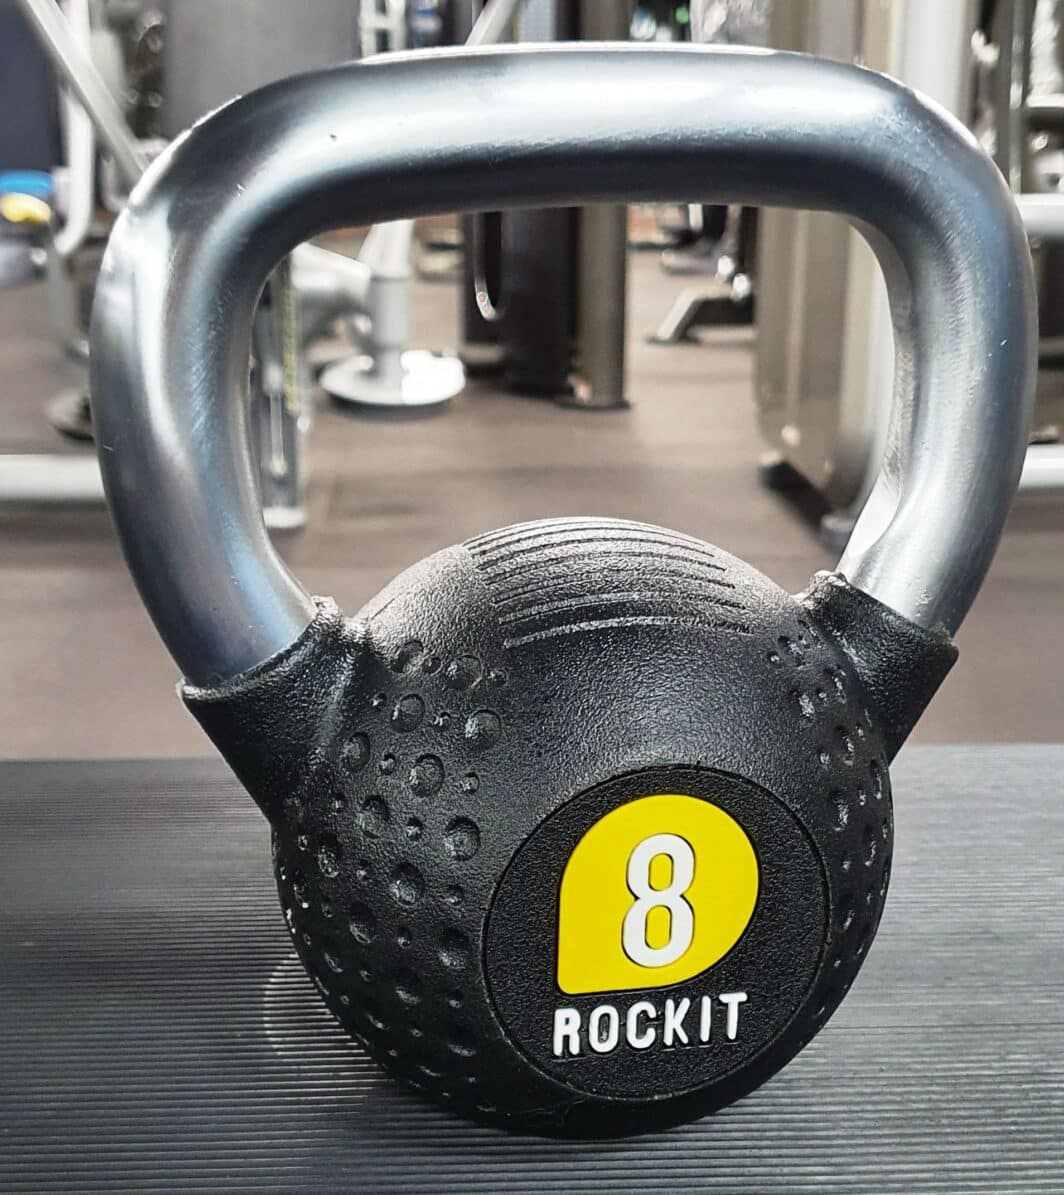 Rockit Urethane Kettlebells with yellow decoration in gym setting